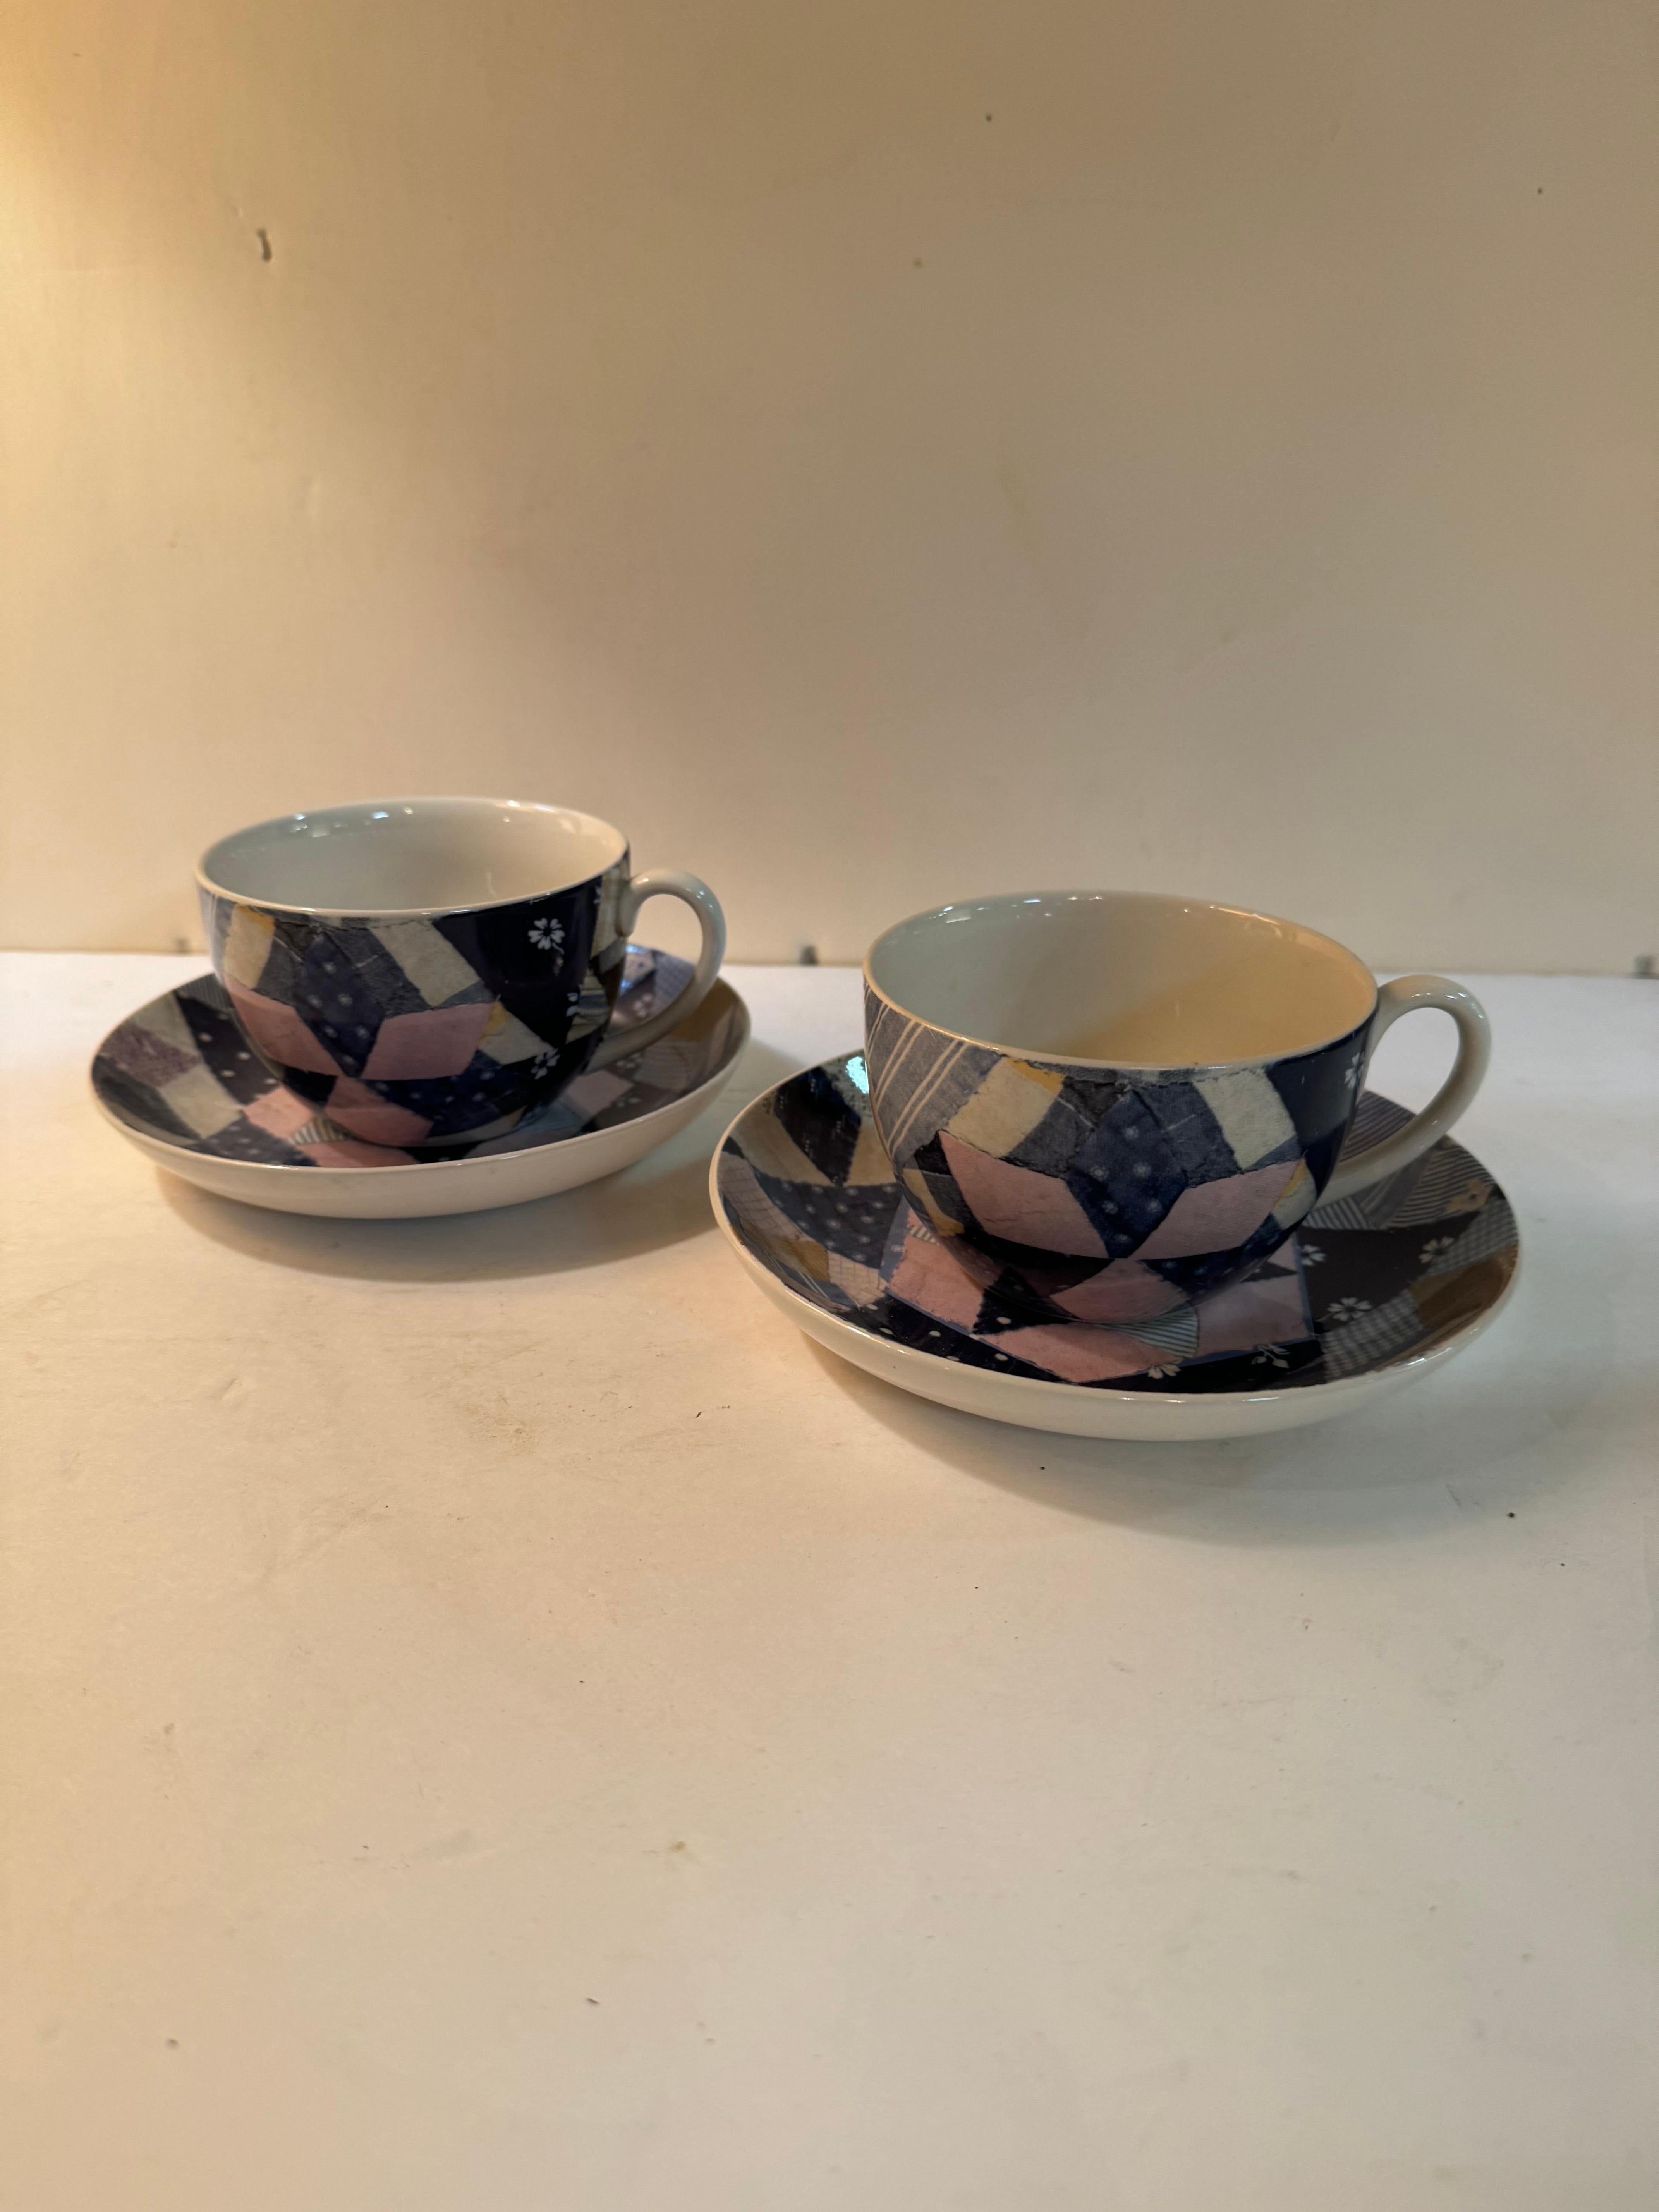 A four (4) piece  up and saucer set in the Patchwork pattern by Wedgwood for Ralph Lauren. Made in England, circa 1990.

This rare and out of production pattern features a blue/white/pink/multi-color pattern evocative of Americana antique